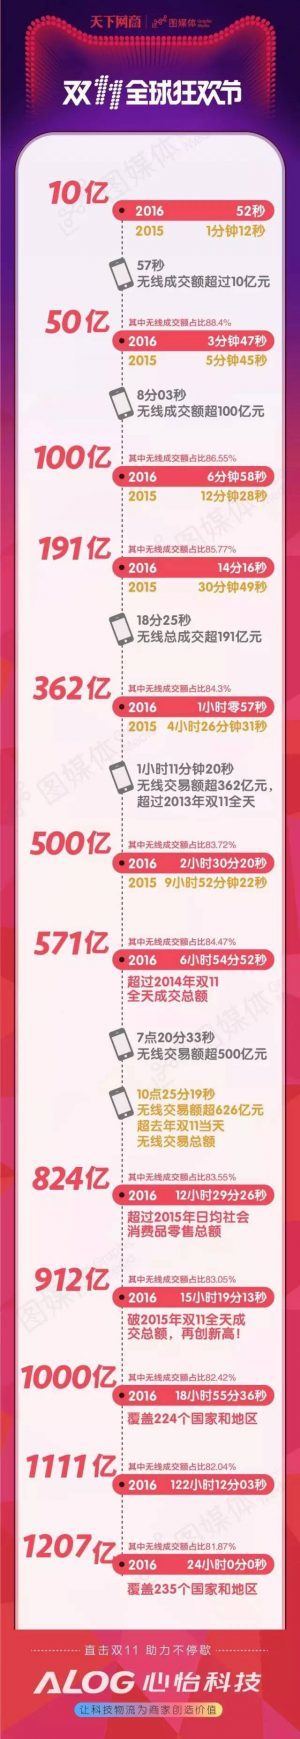 2016 Singles' Day Record published by Alibaba